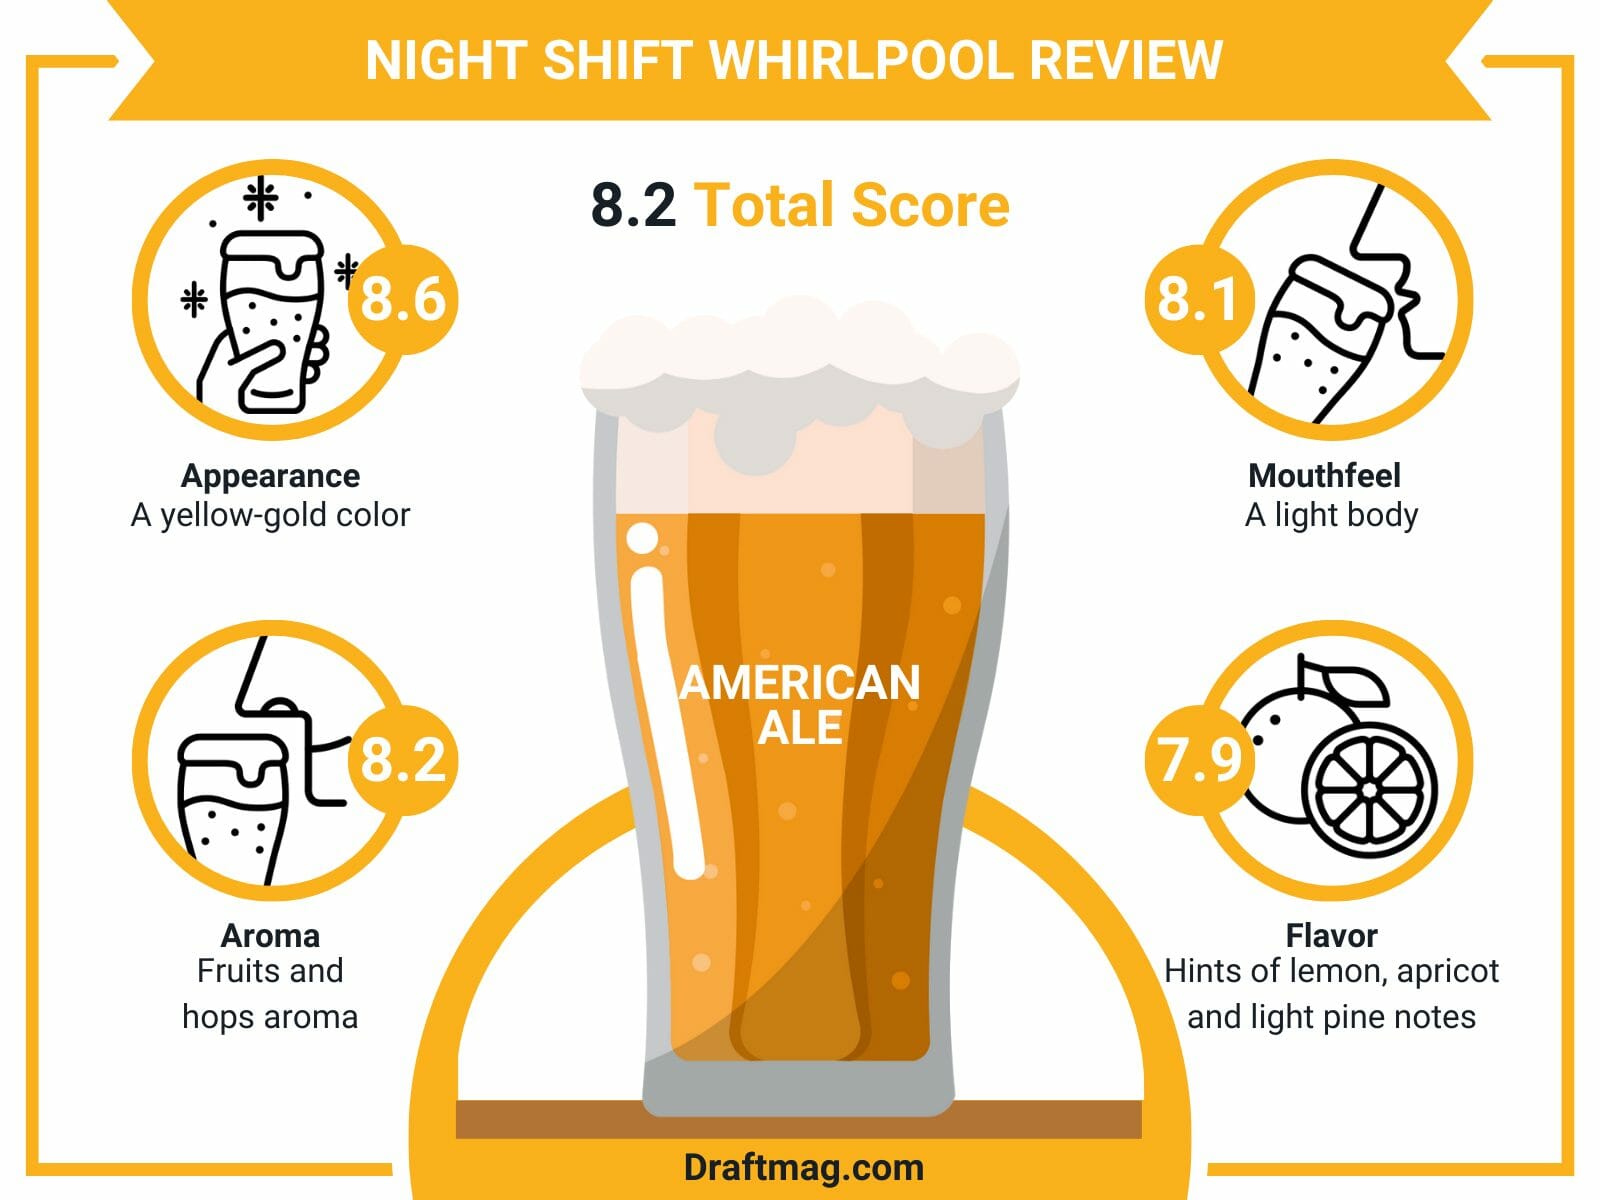 Night shift whirlpool review infographic